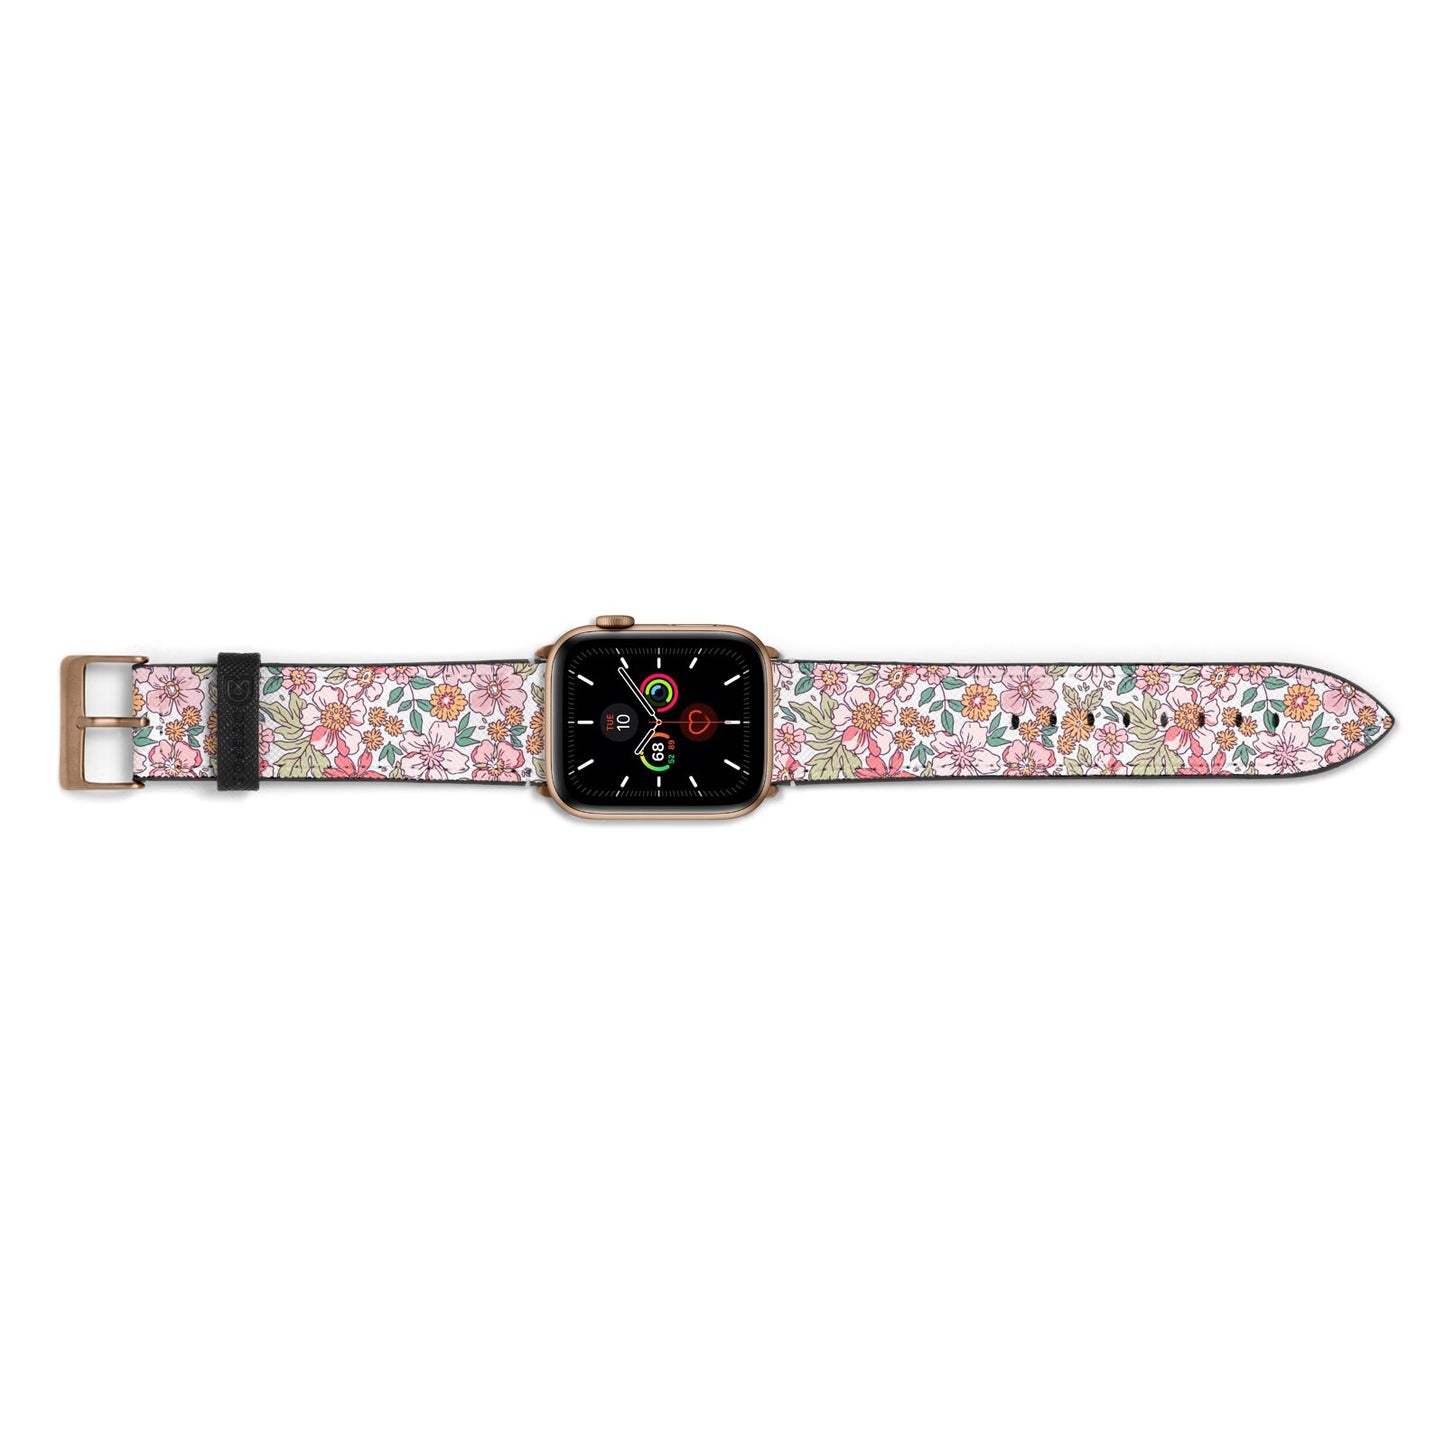 Small Floral Pattern Apple Watch Strap Landscape Image Gold Hardware